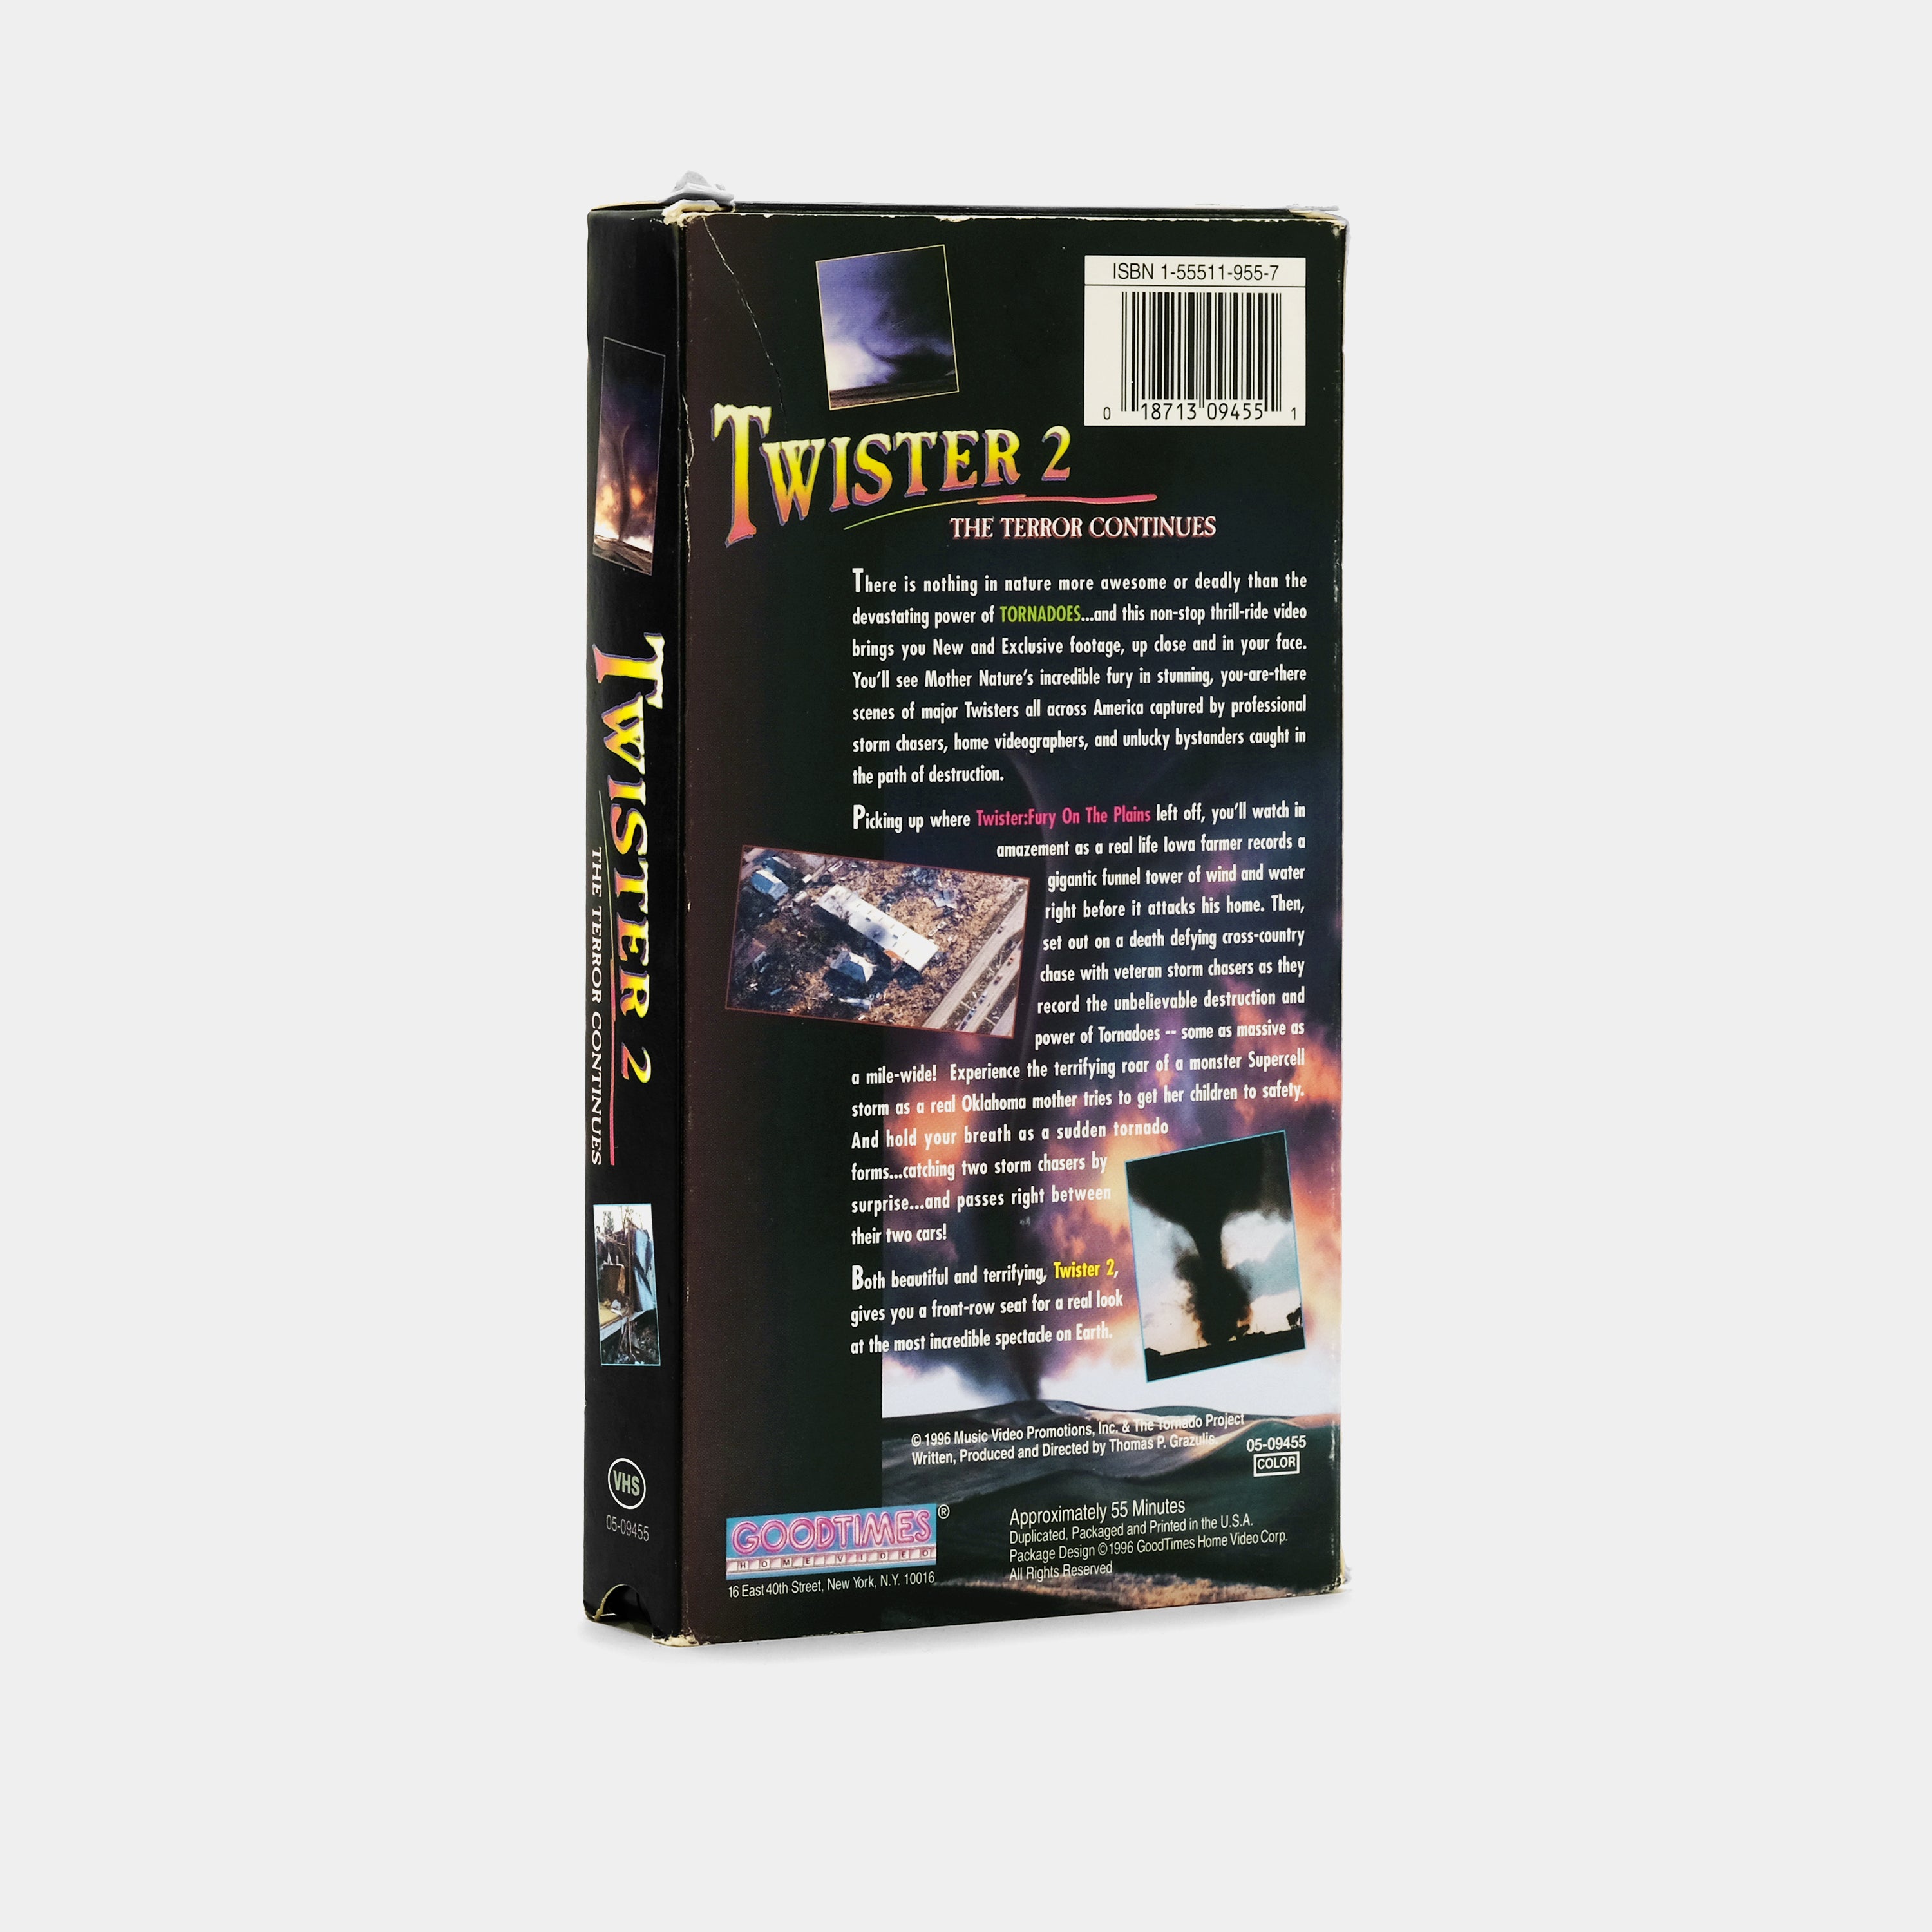 Twister 2: The Terror Continues VHS Tape